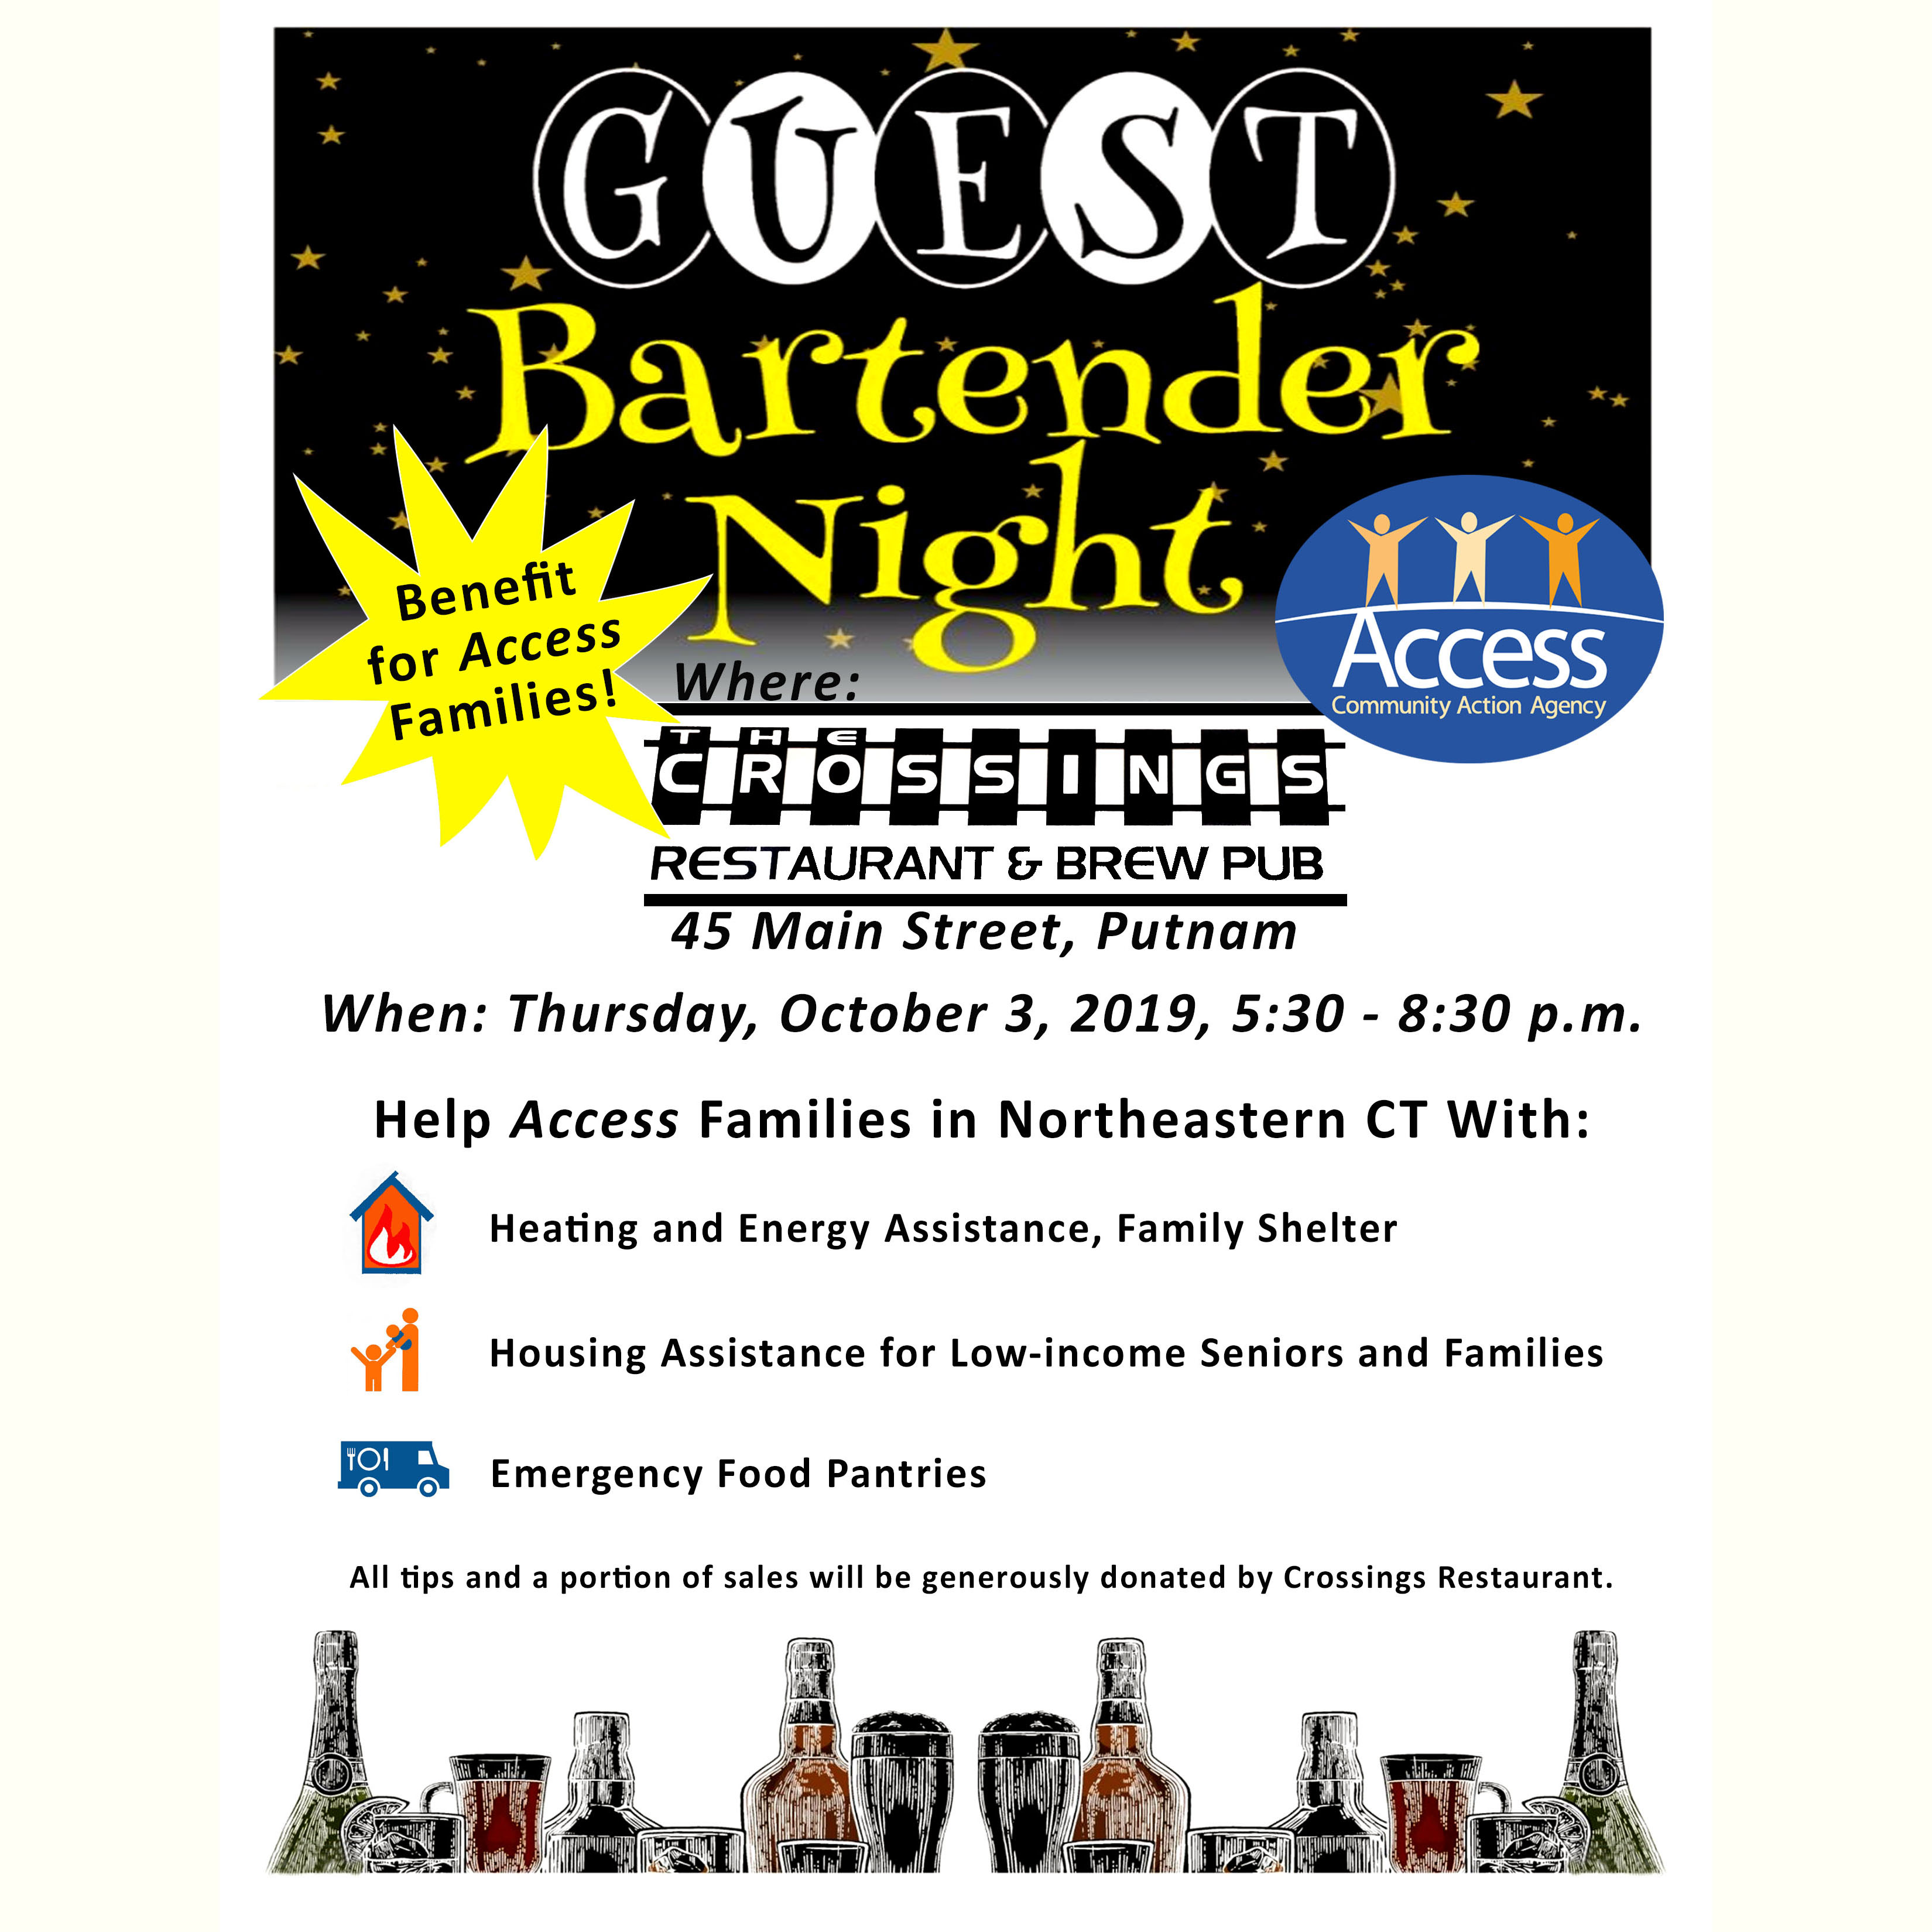 Guest Bartender Night Benefit Access Agency